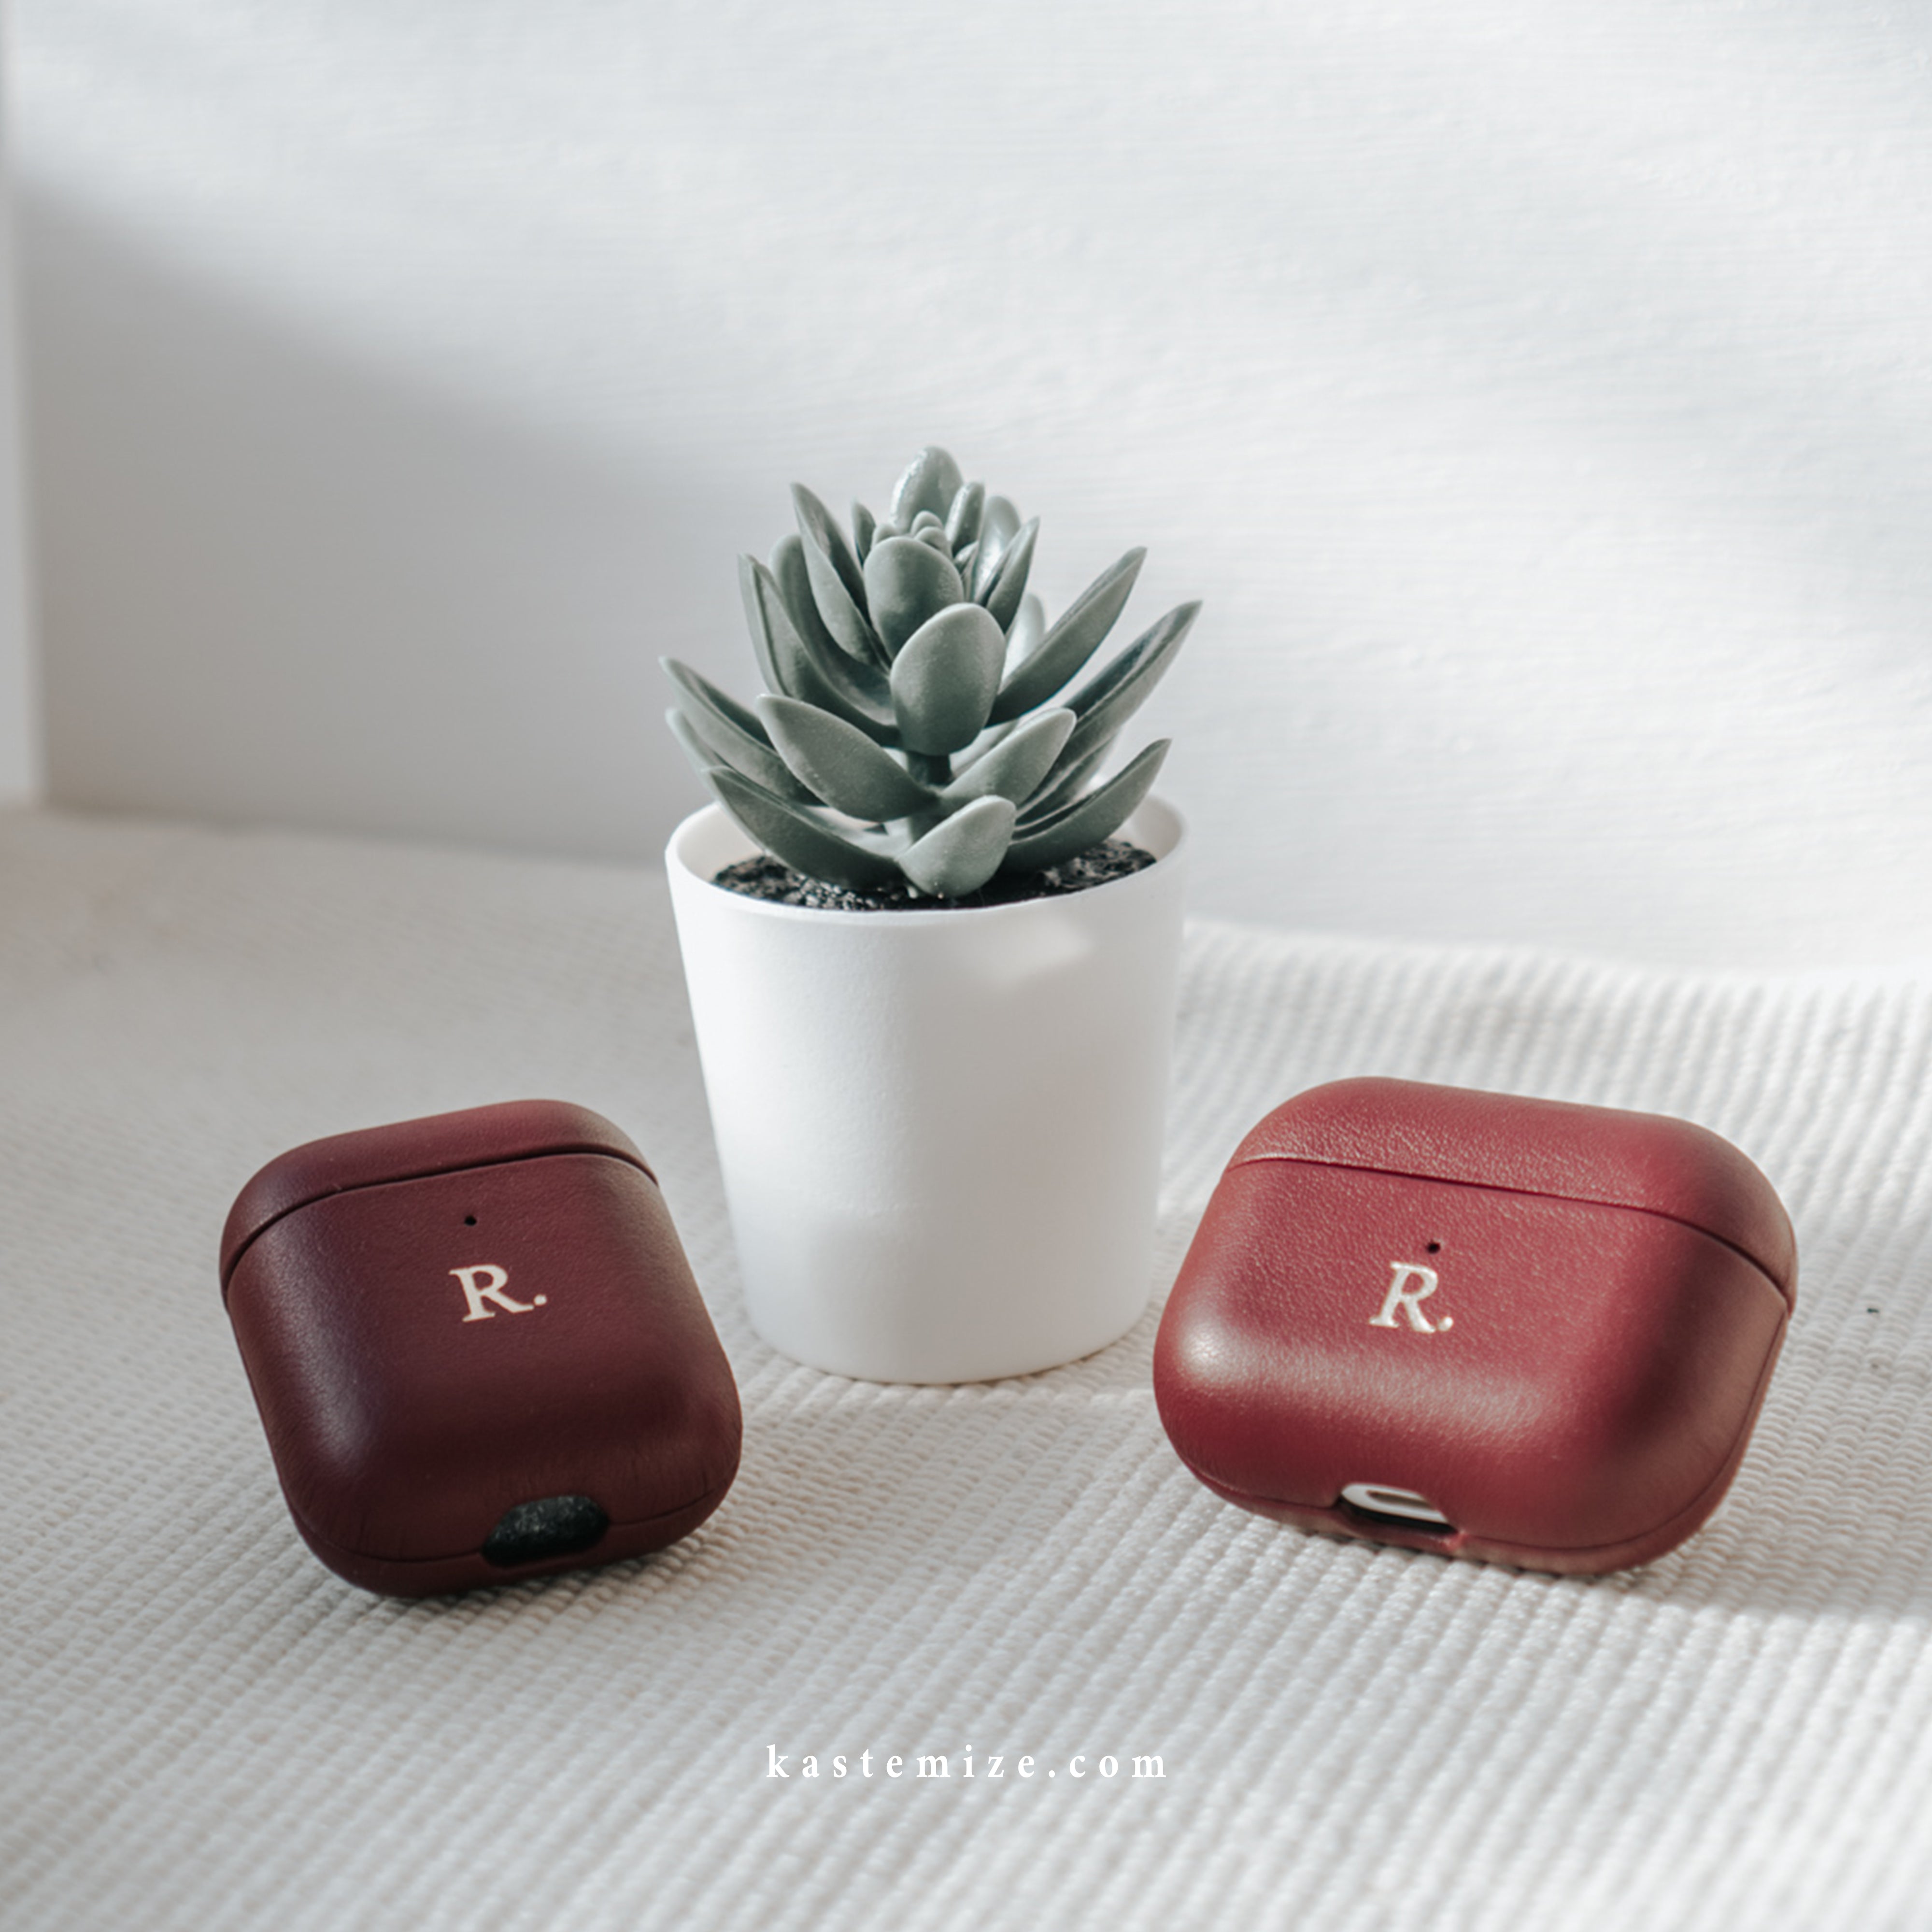 Personalised Burgundy Airpods Pro Case in Singapore with name engraving and customisation